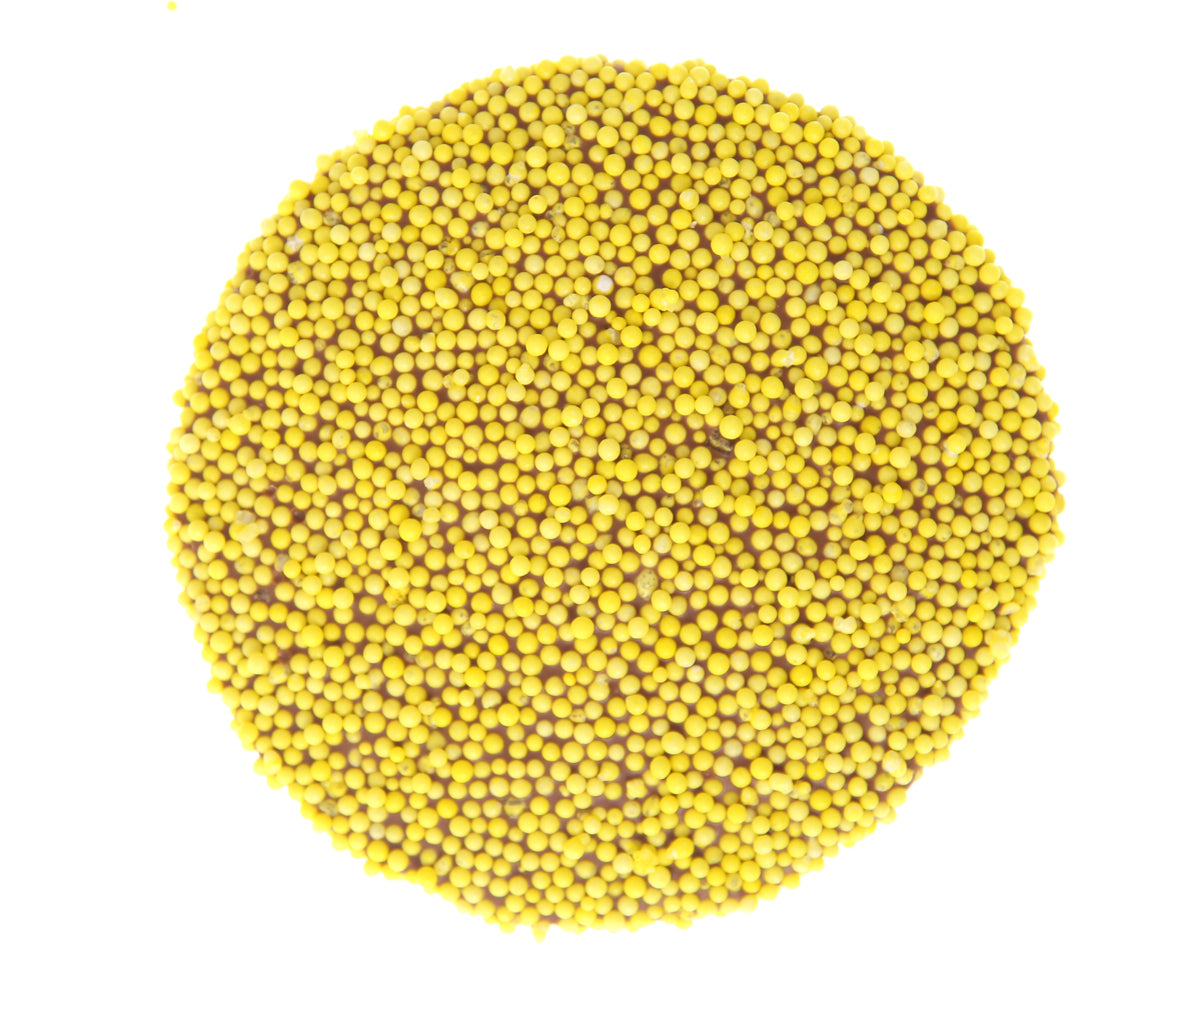 40g YELLOW Single Freckle - No Front Label